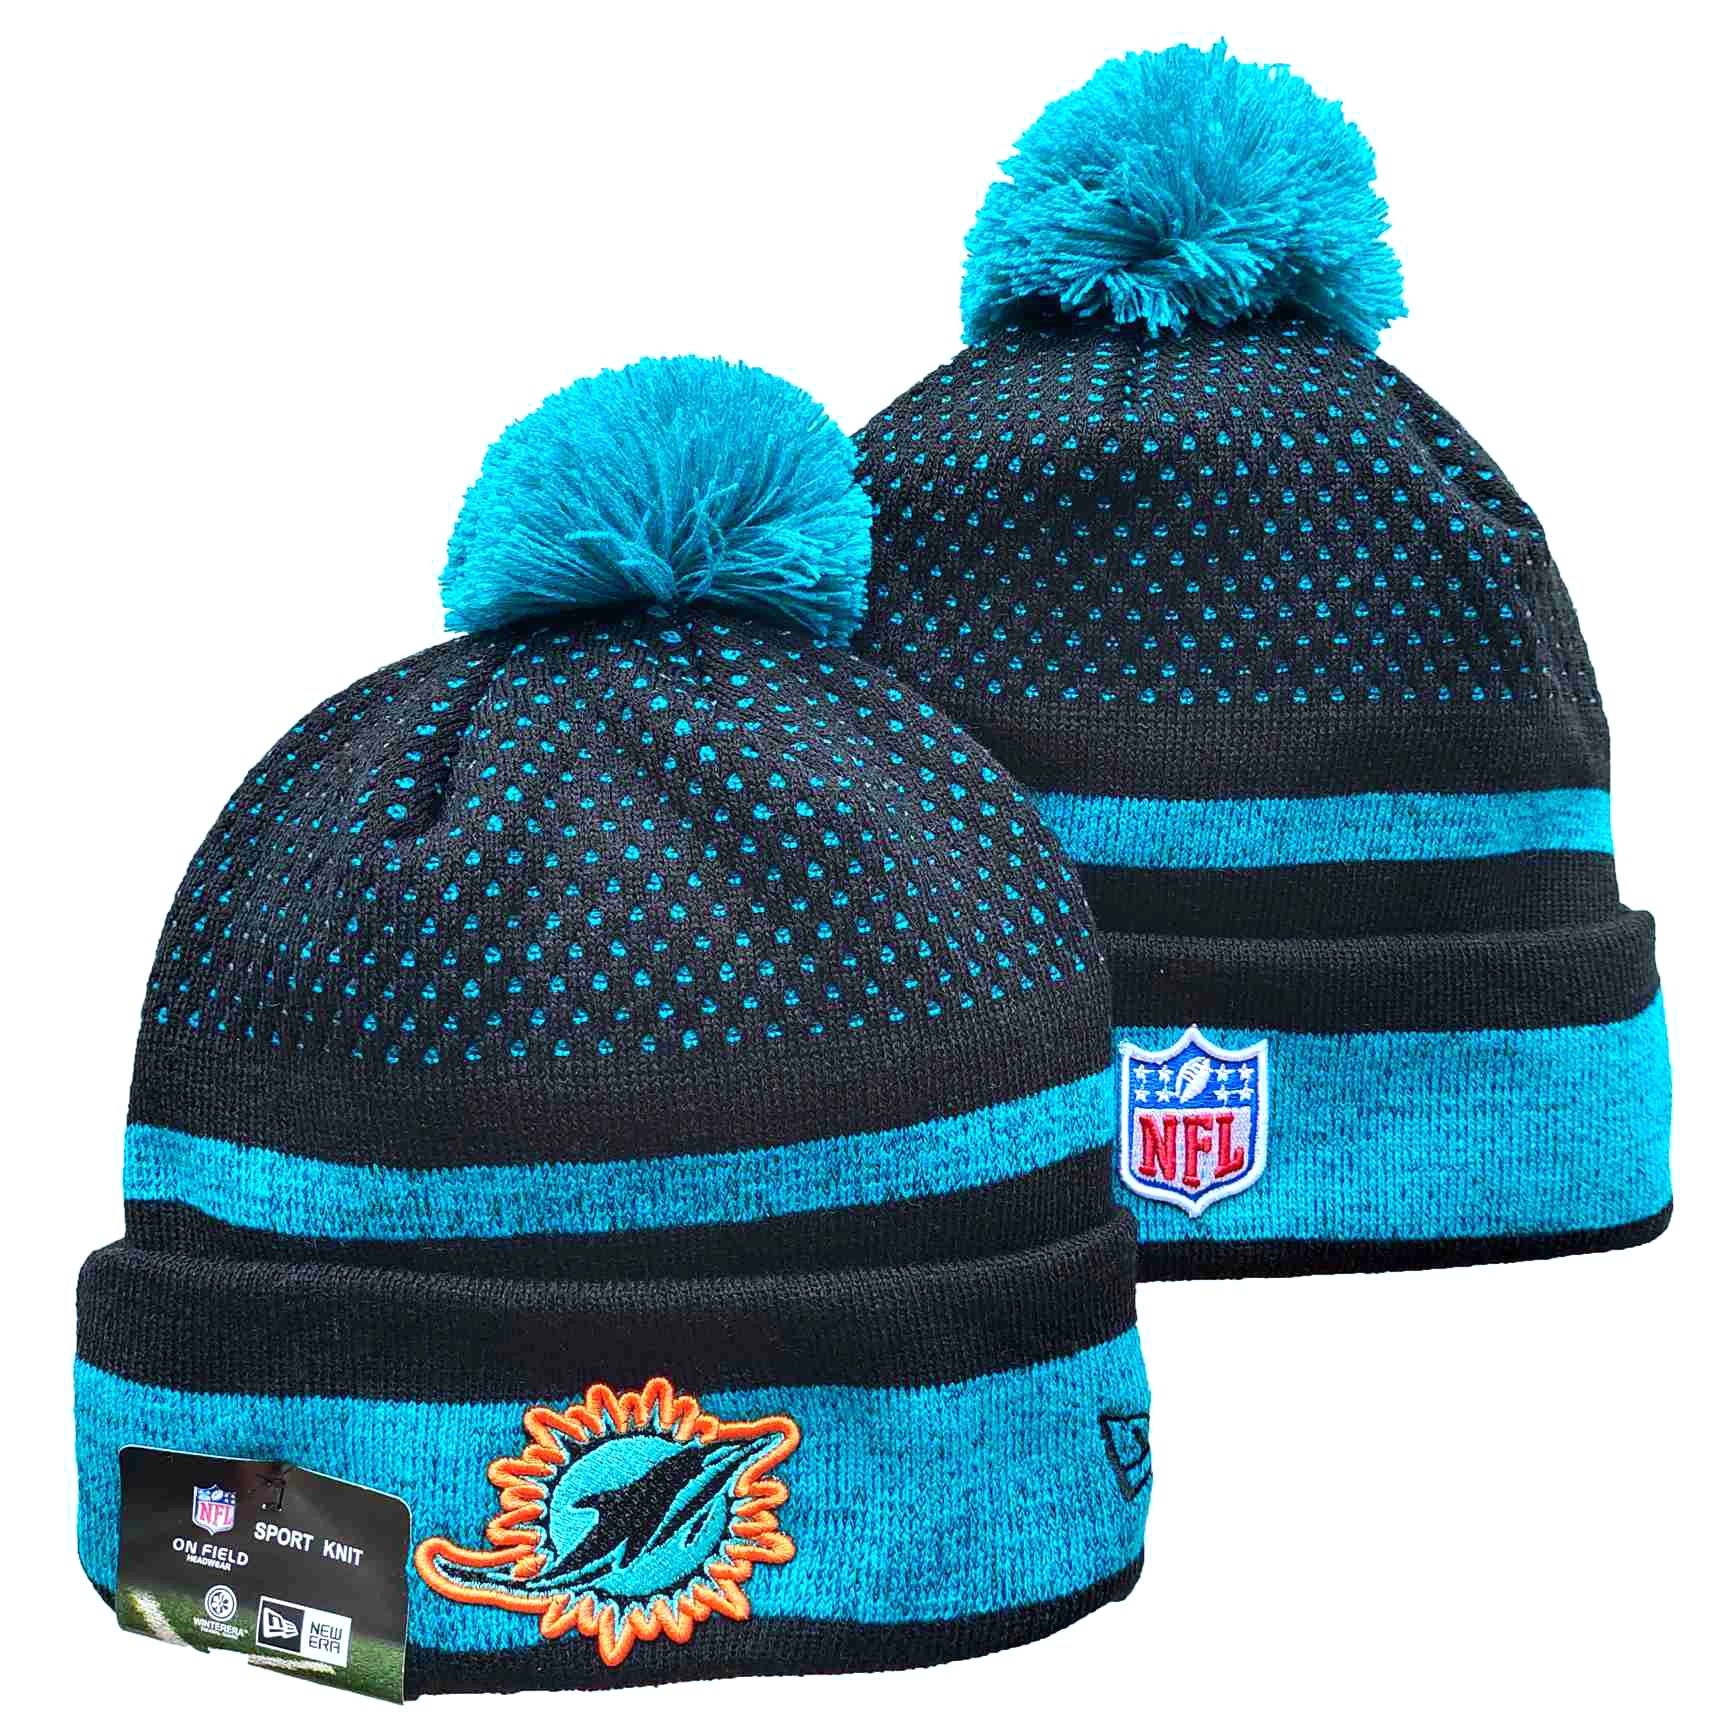 NFL Miami Dolphins Beanies Knit Hats-YD1029